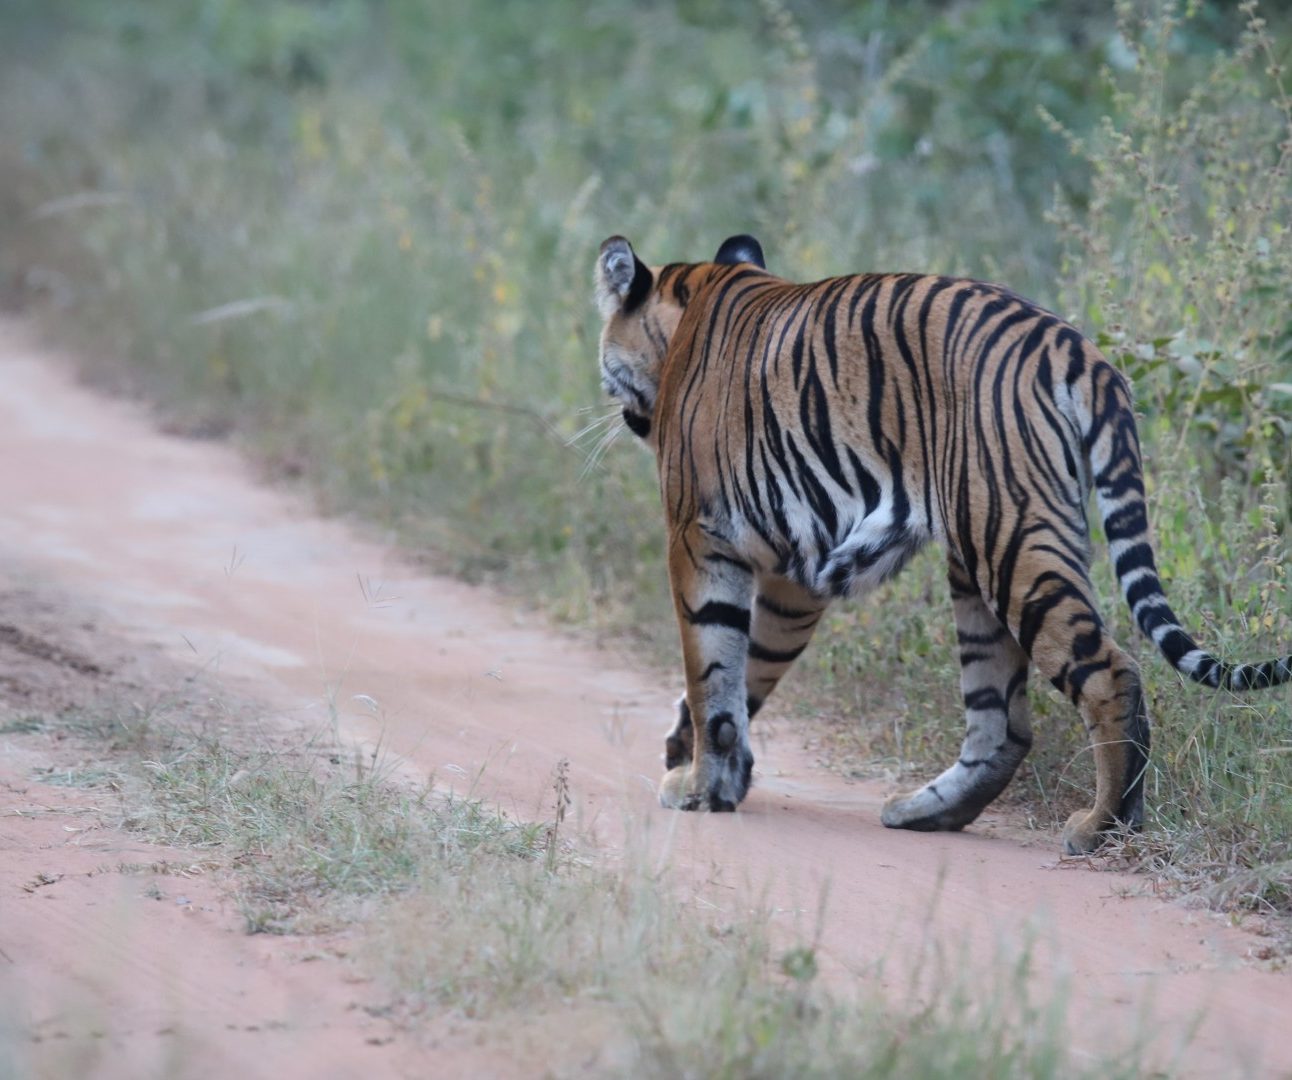 A wild tiger walking along a track